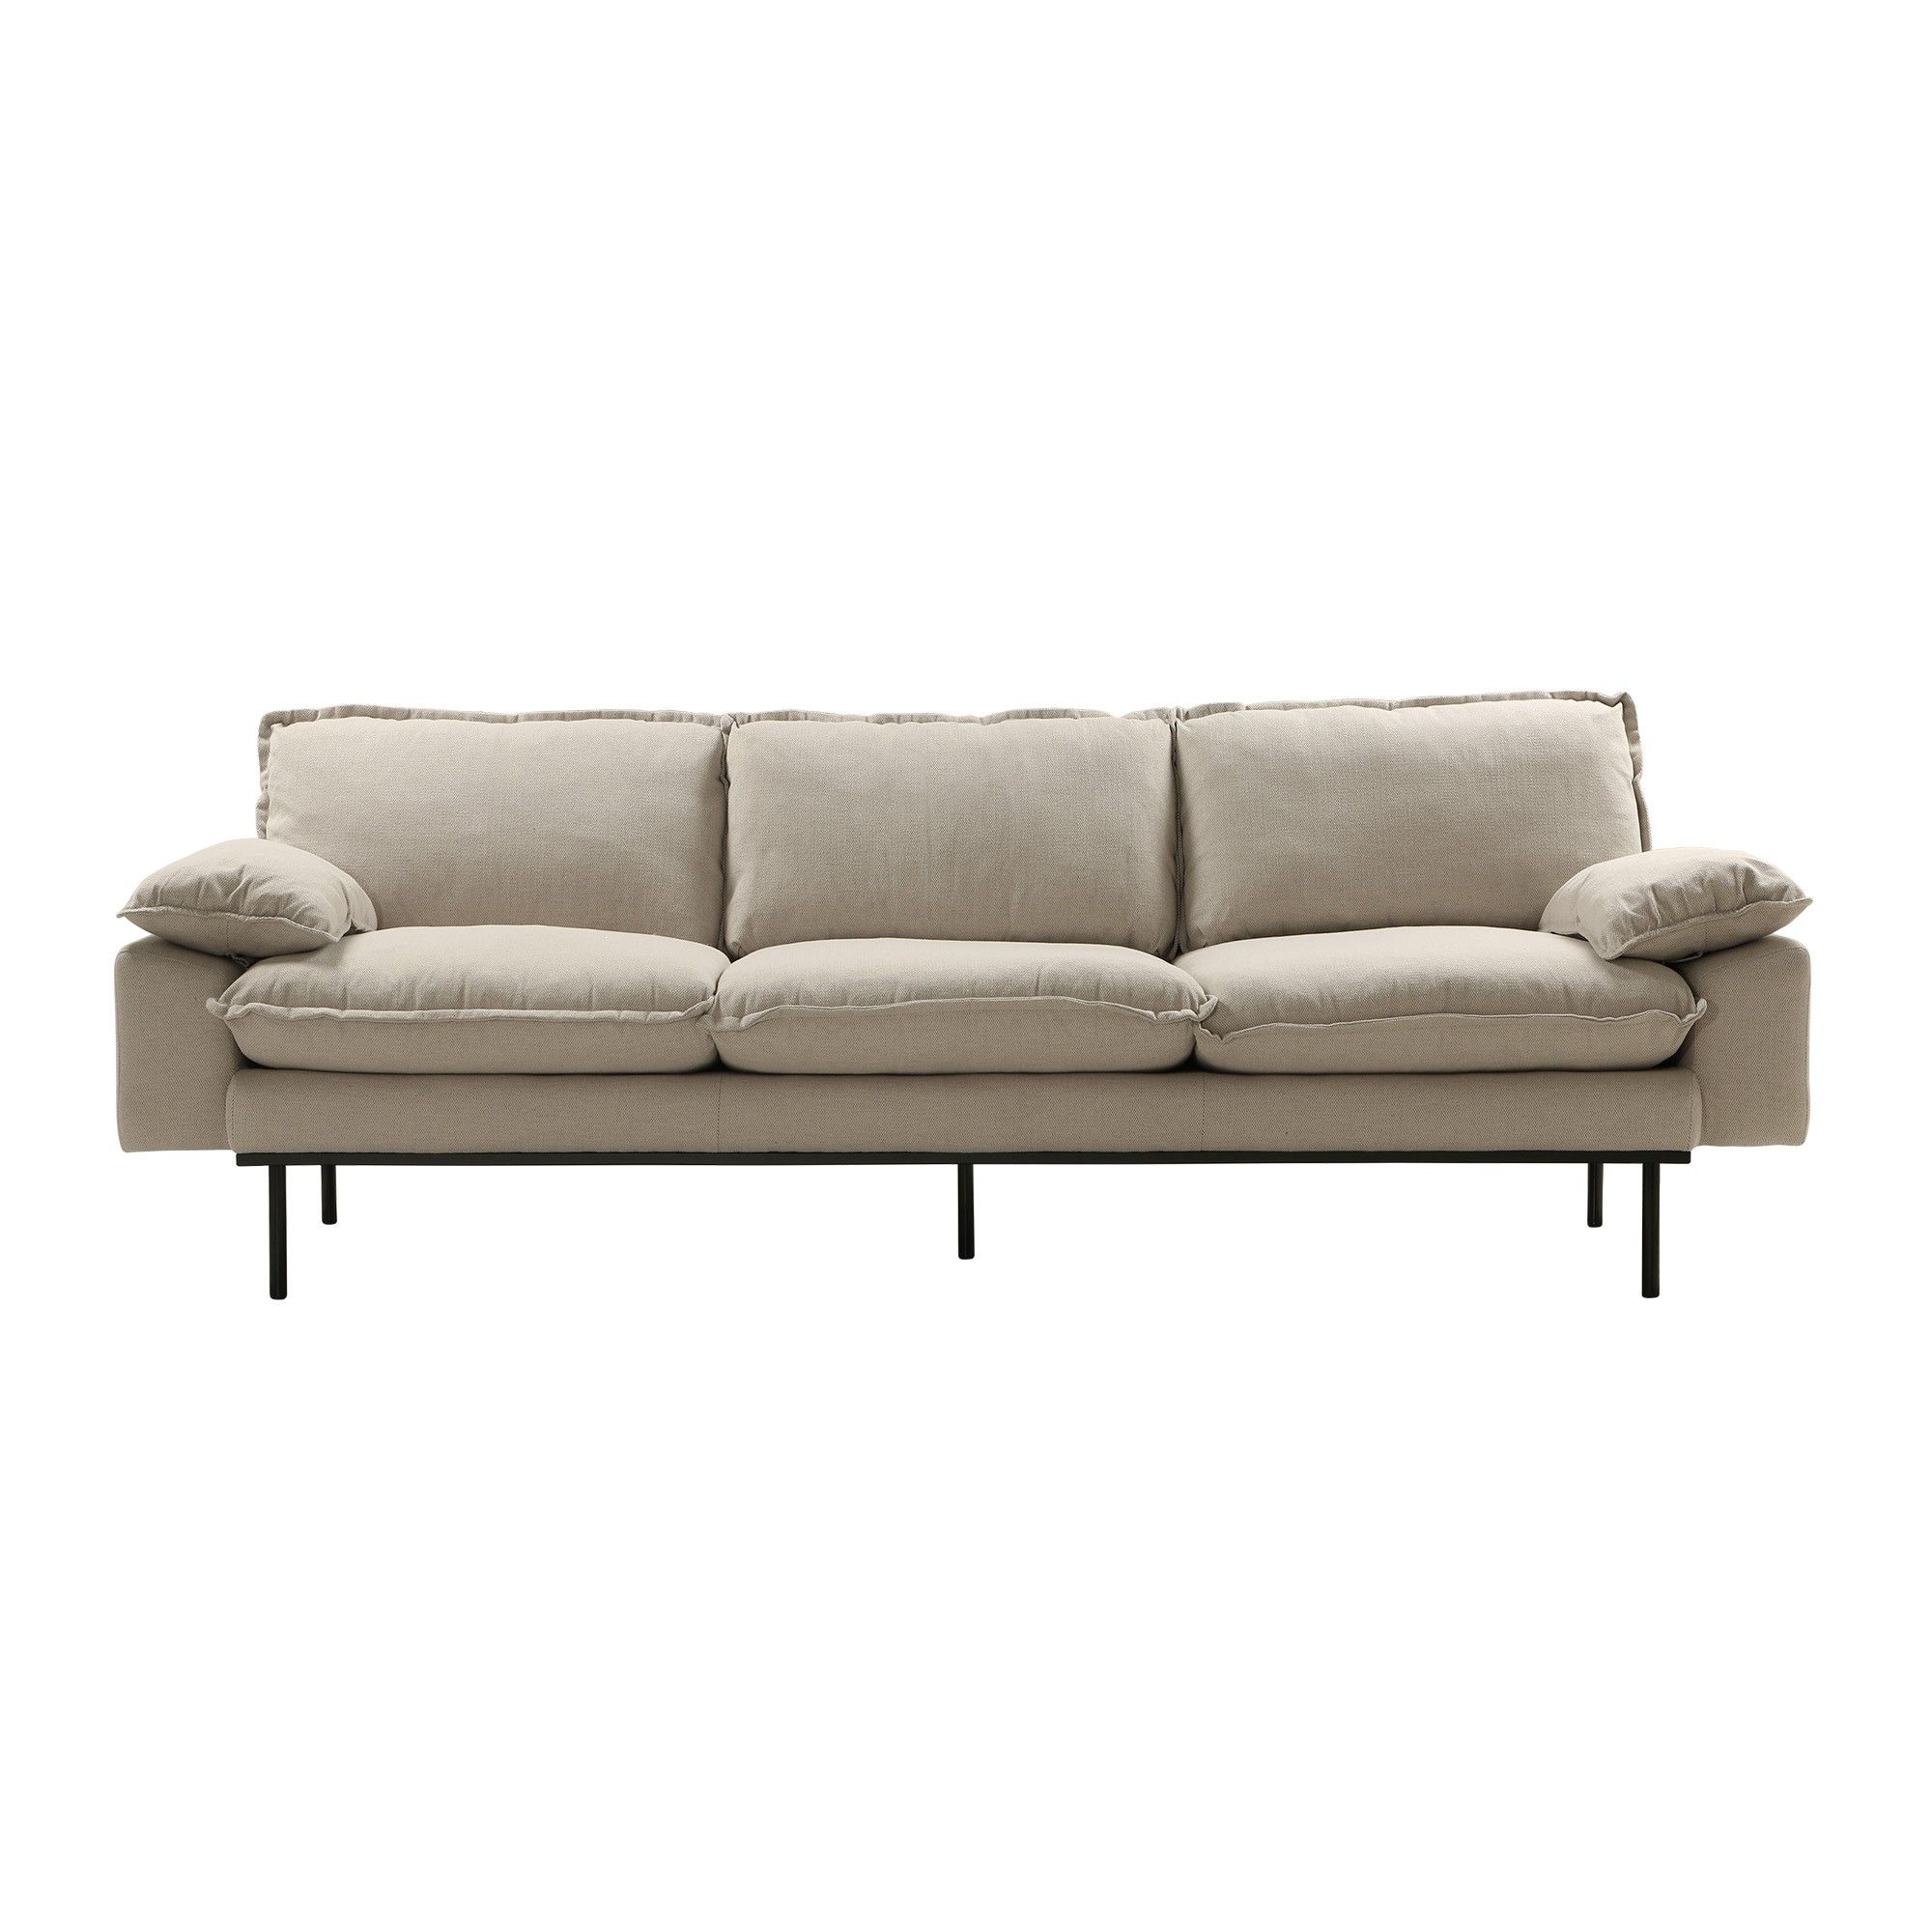 Retro 4 Seater Sofa – Beige – Hk Living For Sofas In Beige (View 7 of 15)